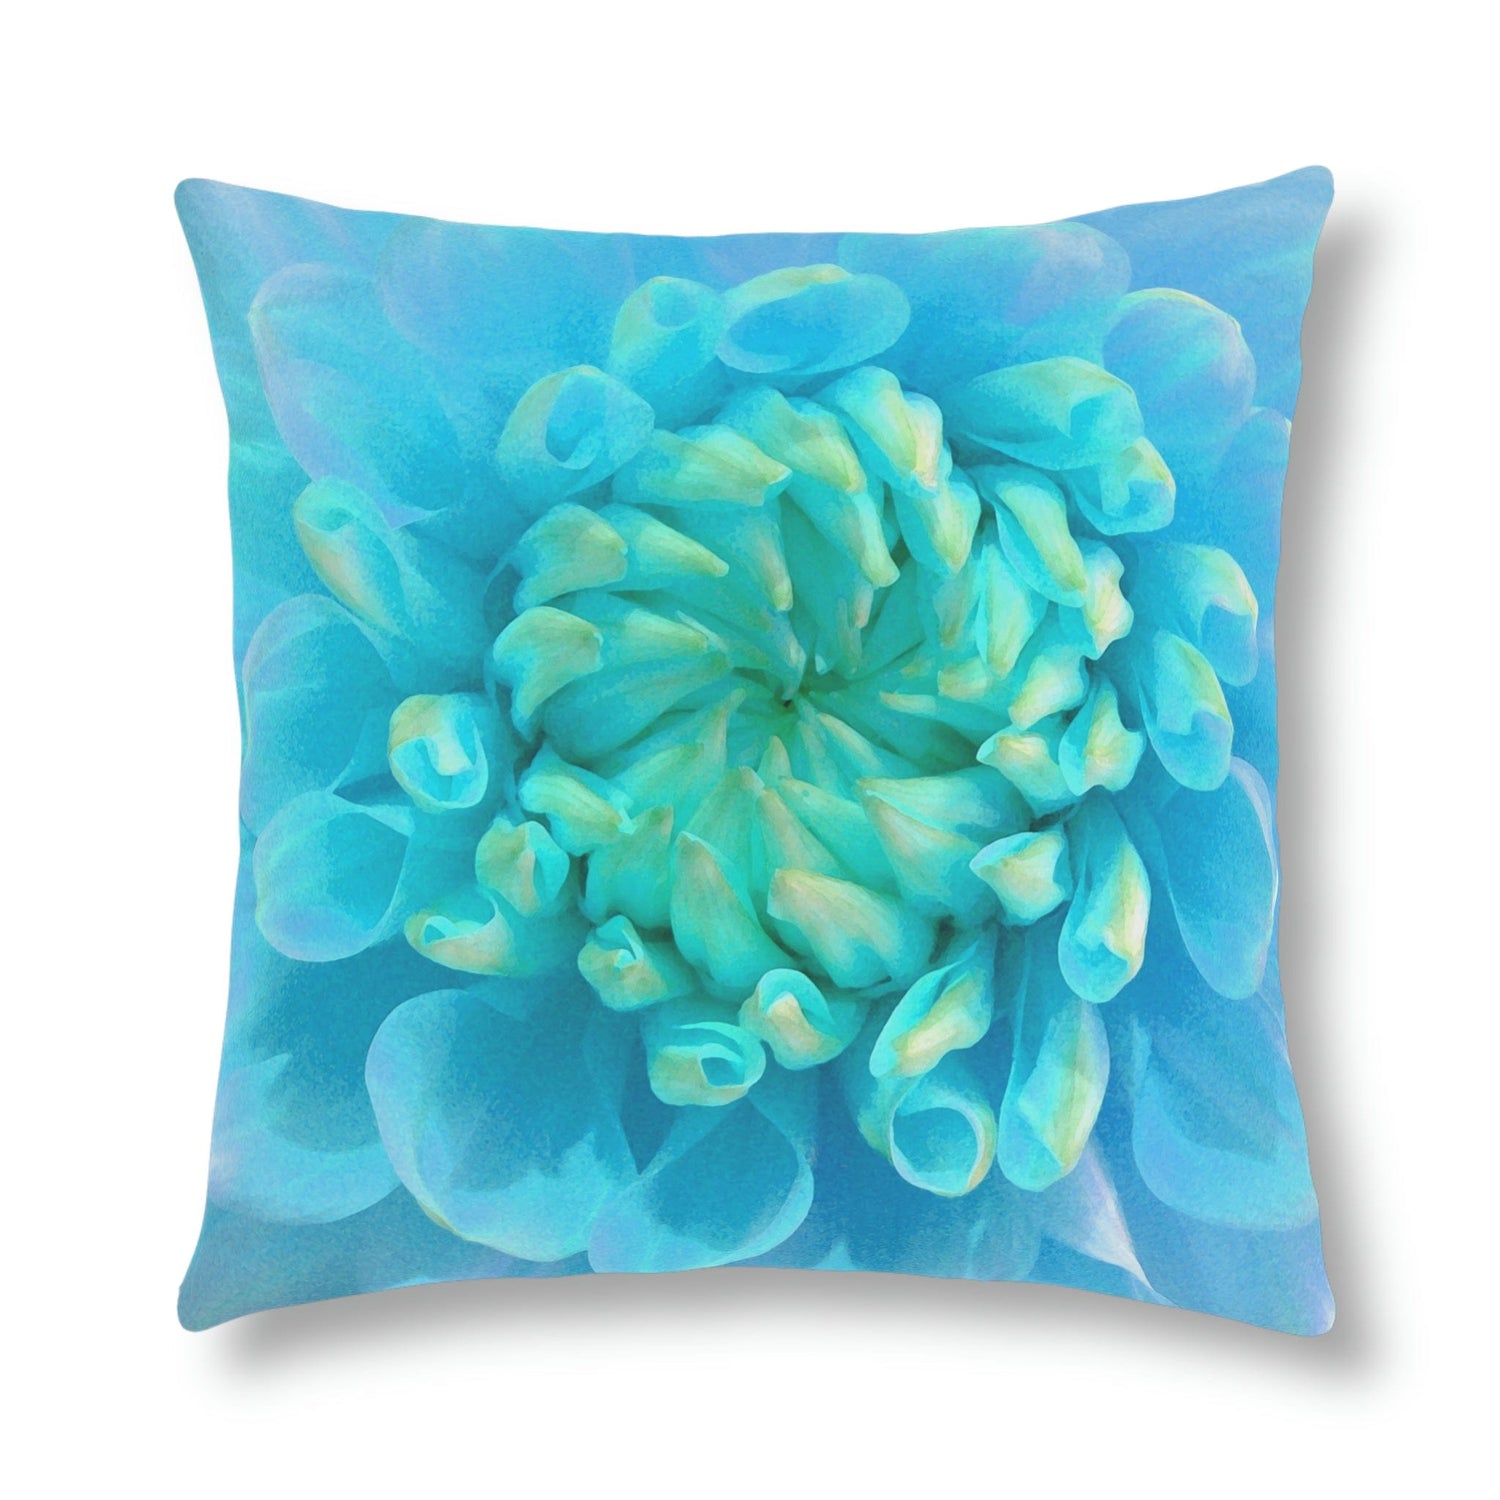 Kate McEnroe New York Outdoor Pillow in Painted Turquoise Dahlia FlowerThrow Pillows16407444430898672731